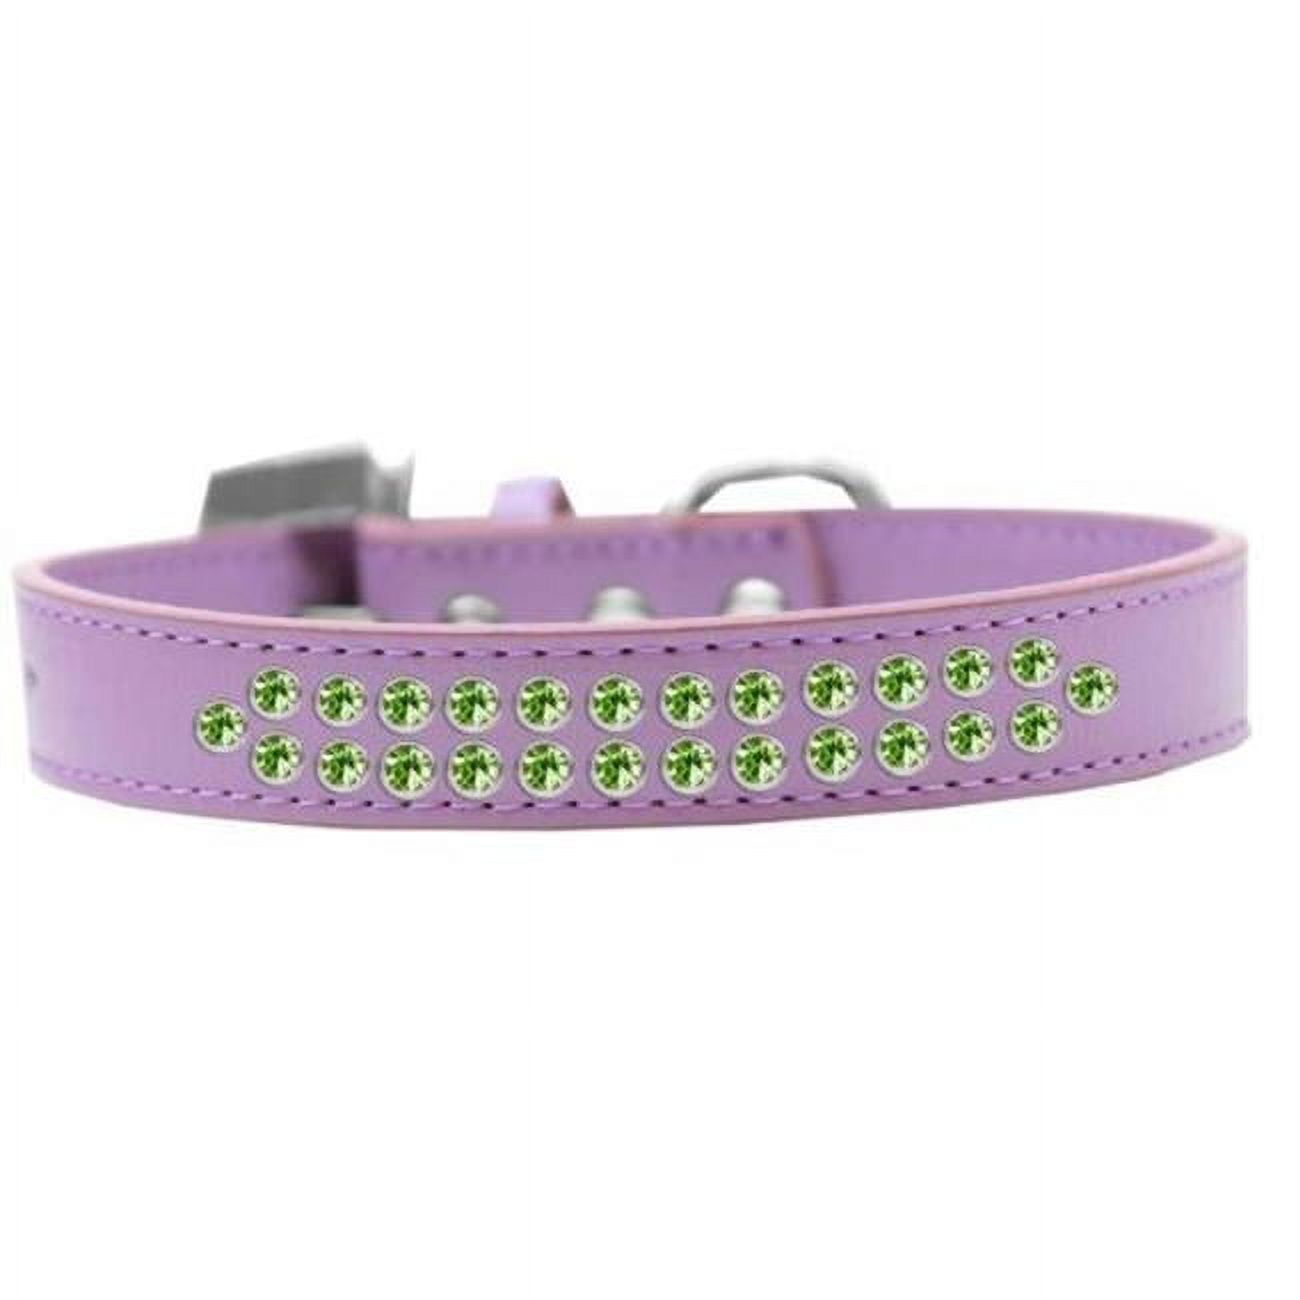 Mirage Pet Products613-08 LV-14 Two Row Lime Green Crystal Dog Collar,  Lavender - Size 14 